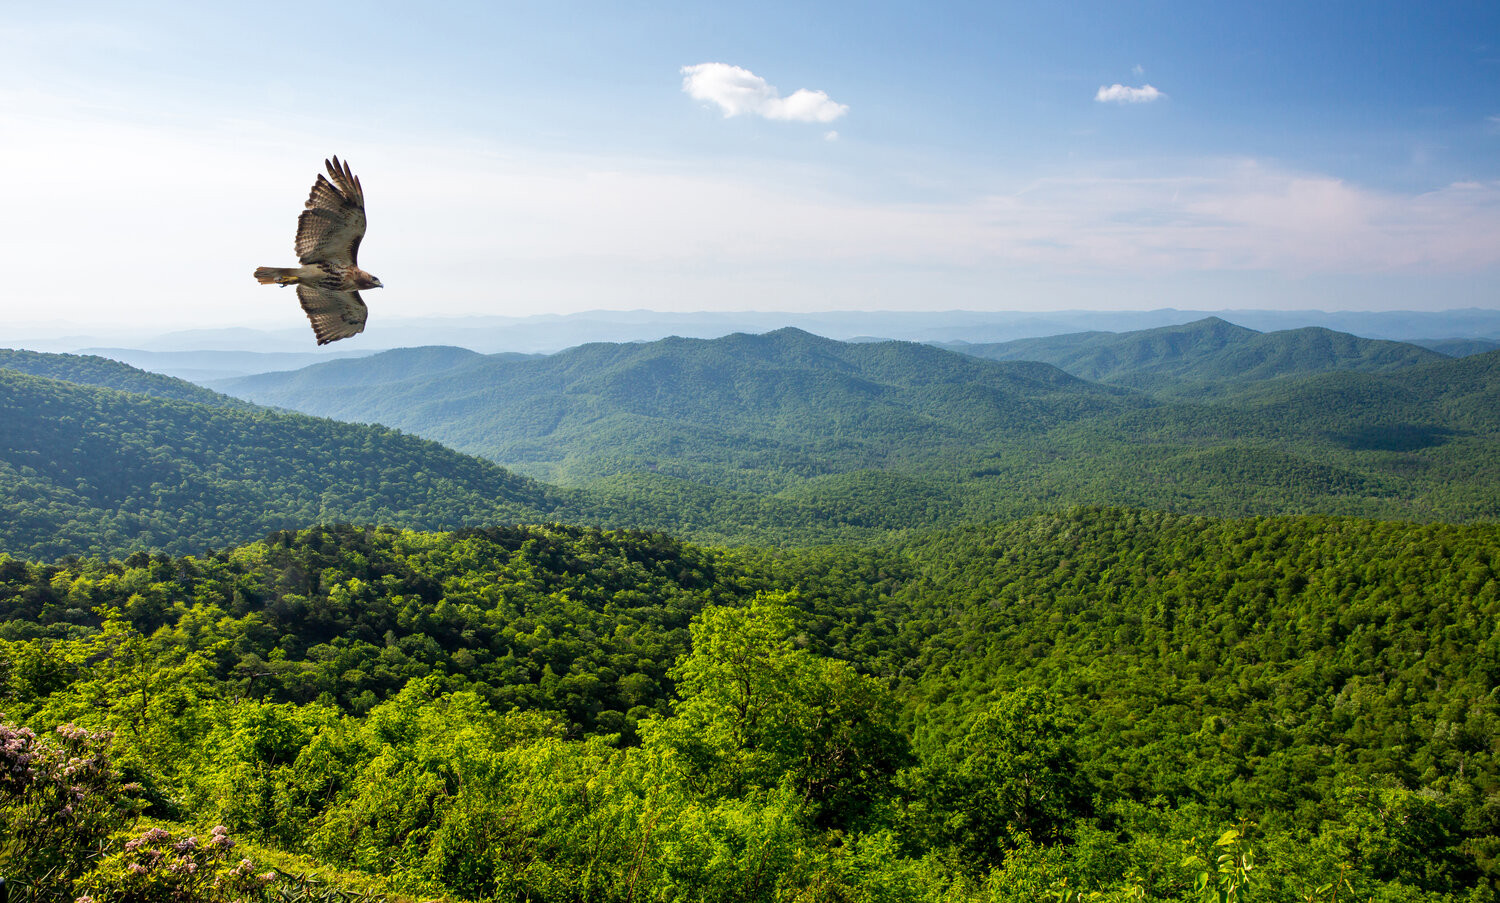 A red-tailed hawk soars above a mountain overlook on the Blue Ridge Parkway in North Carolina.